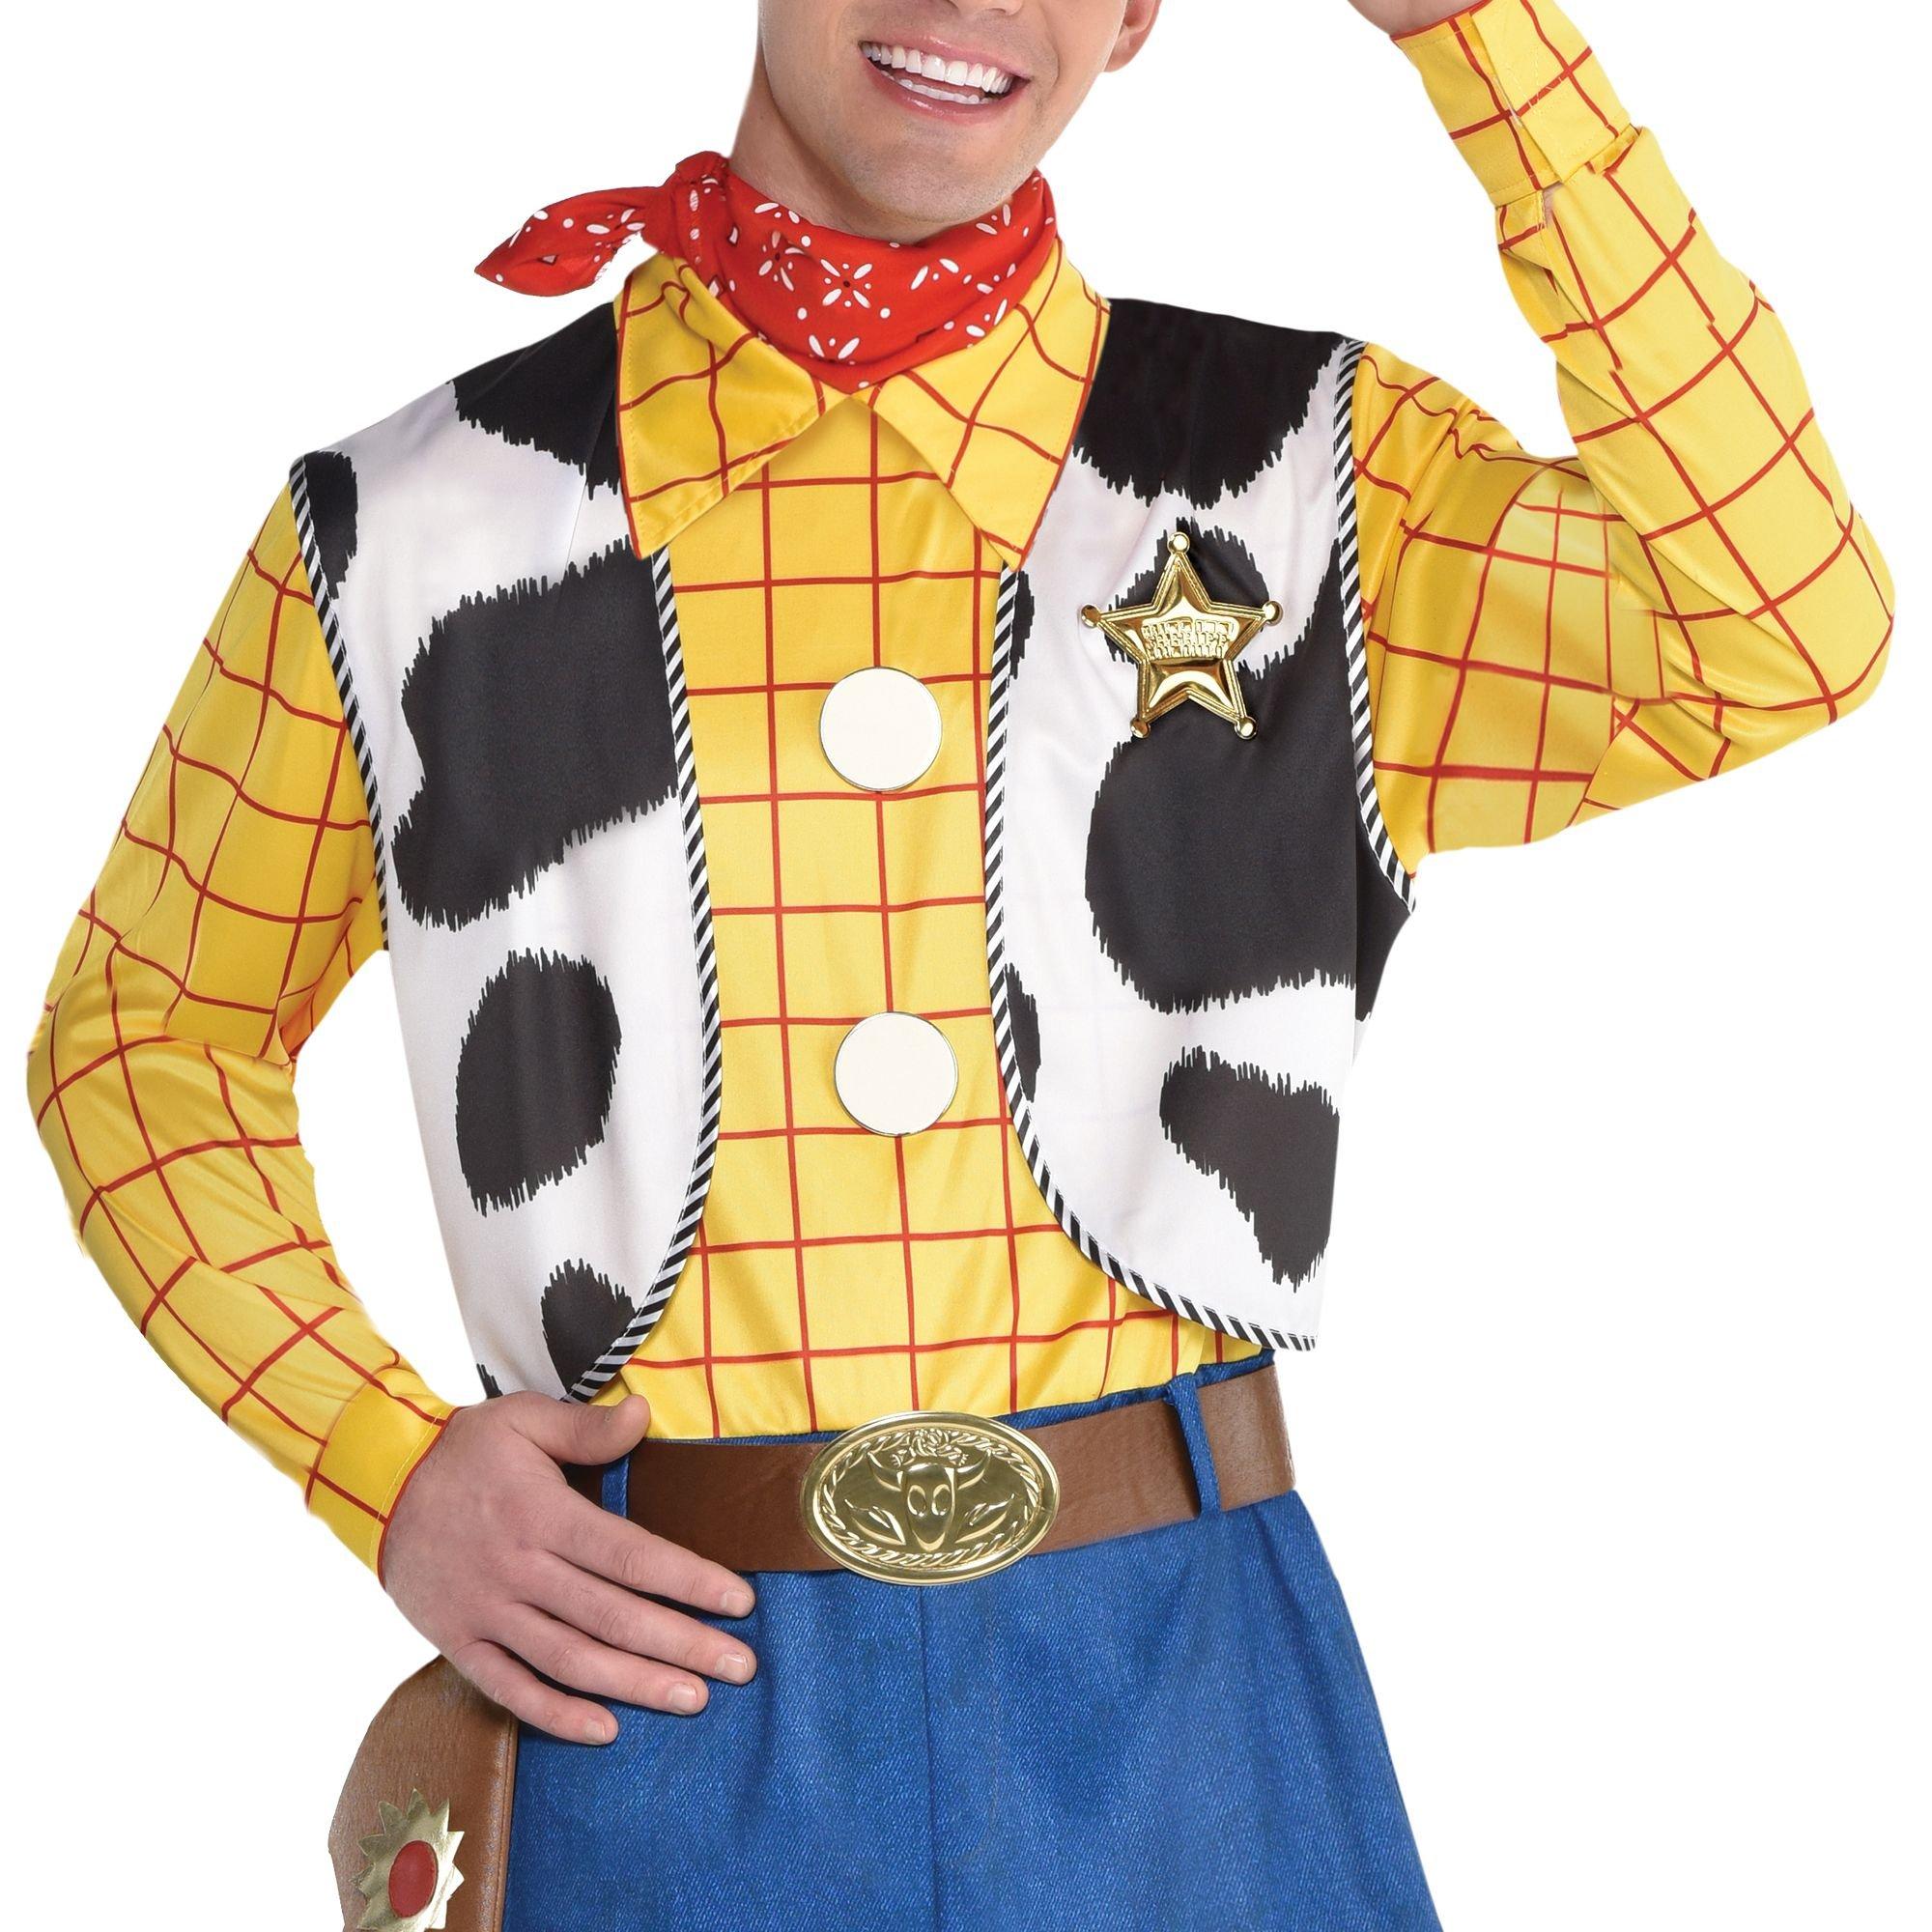 Adult Woody Costume - Toy Story 4 | Party City